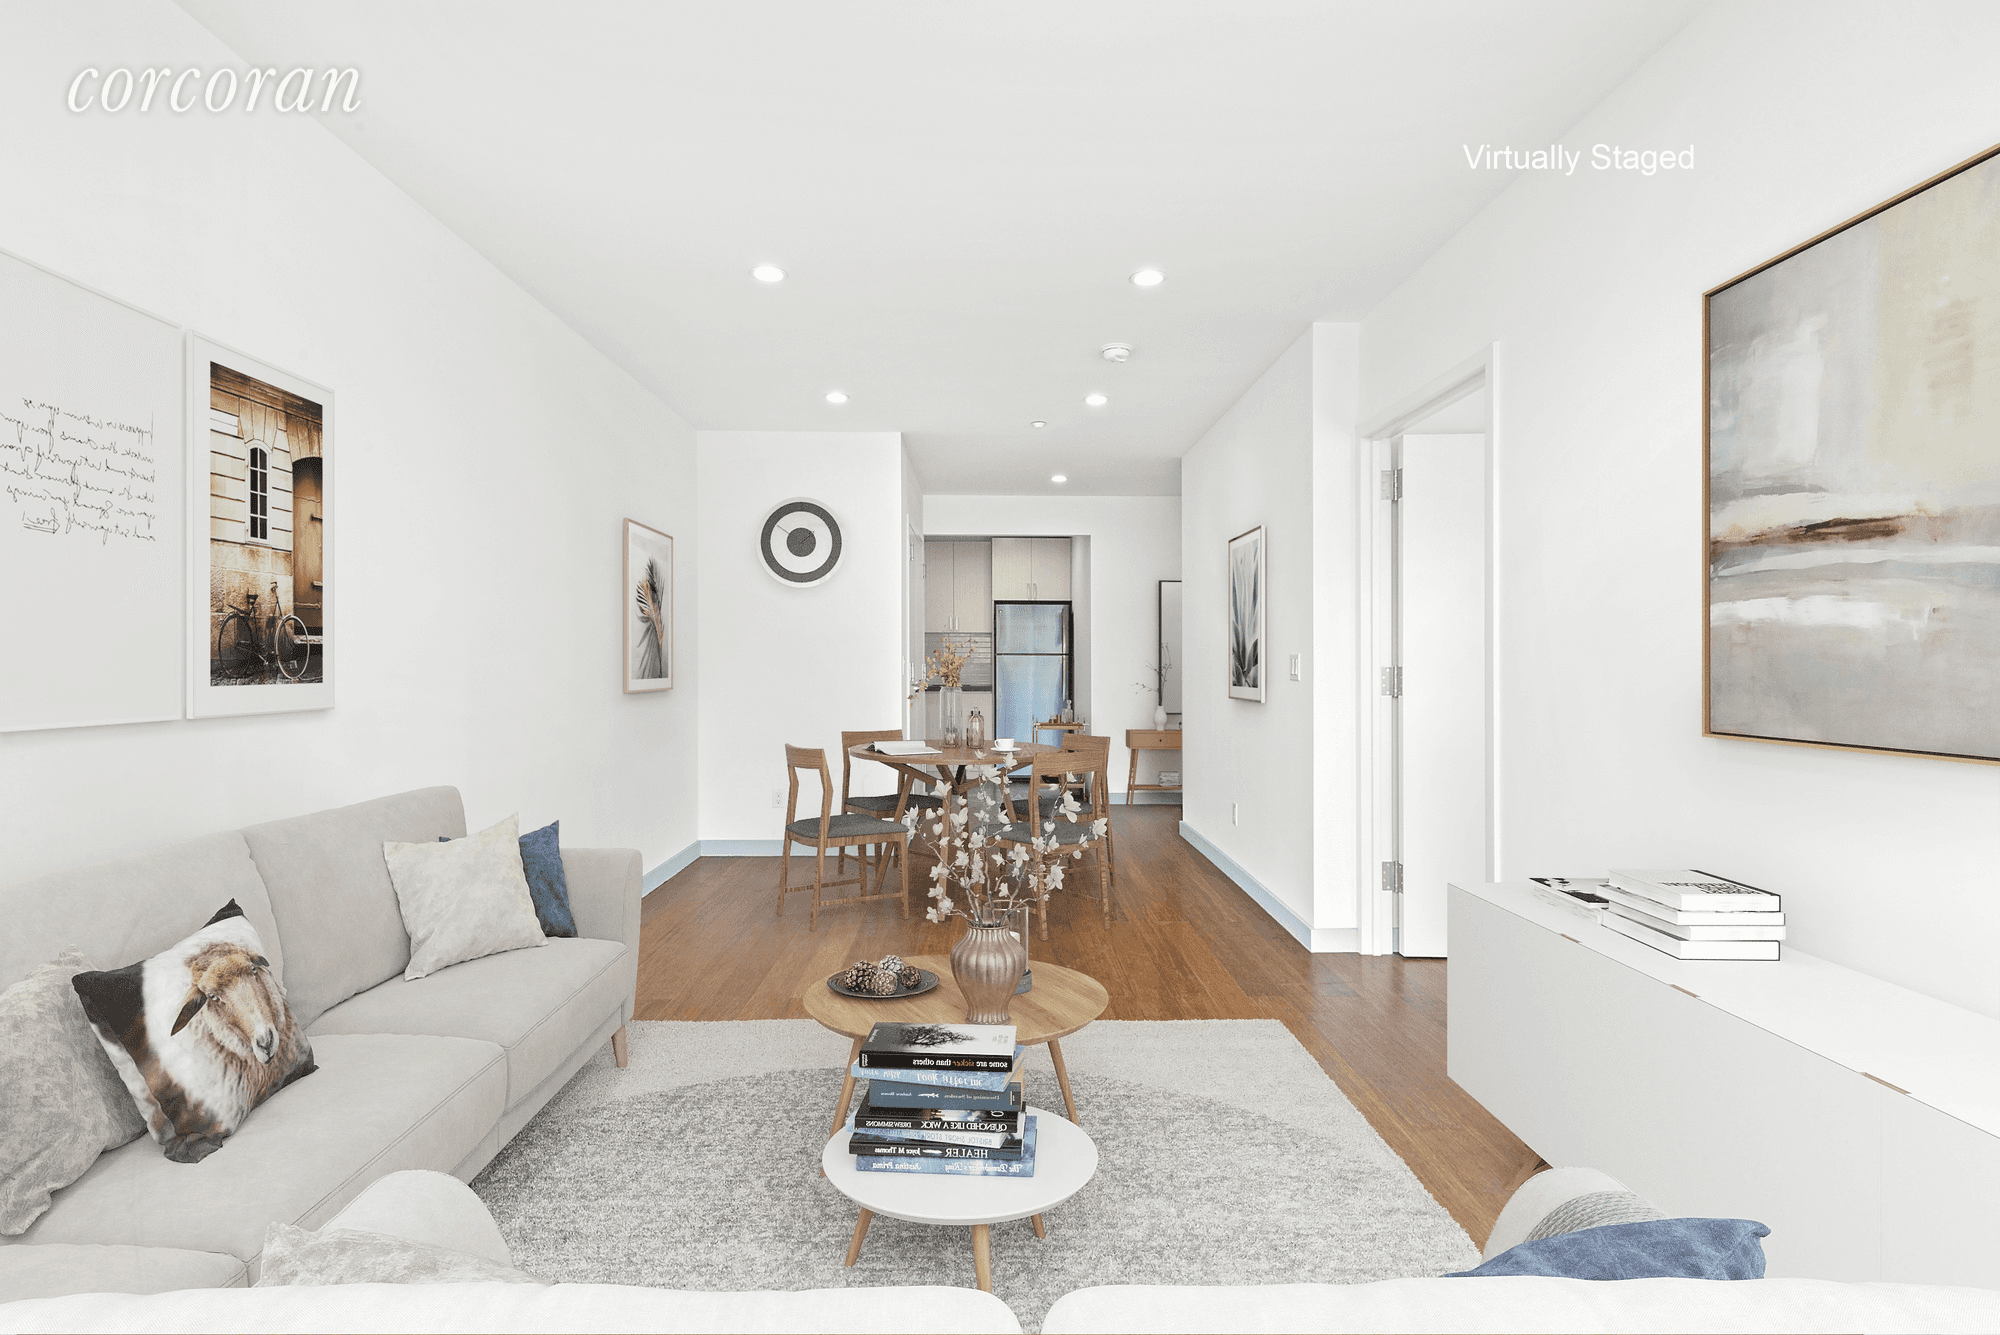 Welcome to the Newest Condos in Sunset Park on Brooklyn's coveted Marathon Route, 4th Ave 4907 Fourth offers tremendous value with spacious and efficient layouts, convenient amenities, and mesmerizing waterfront ...